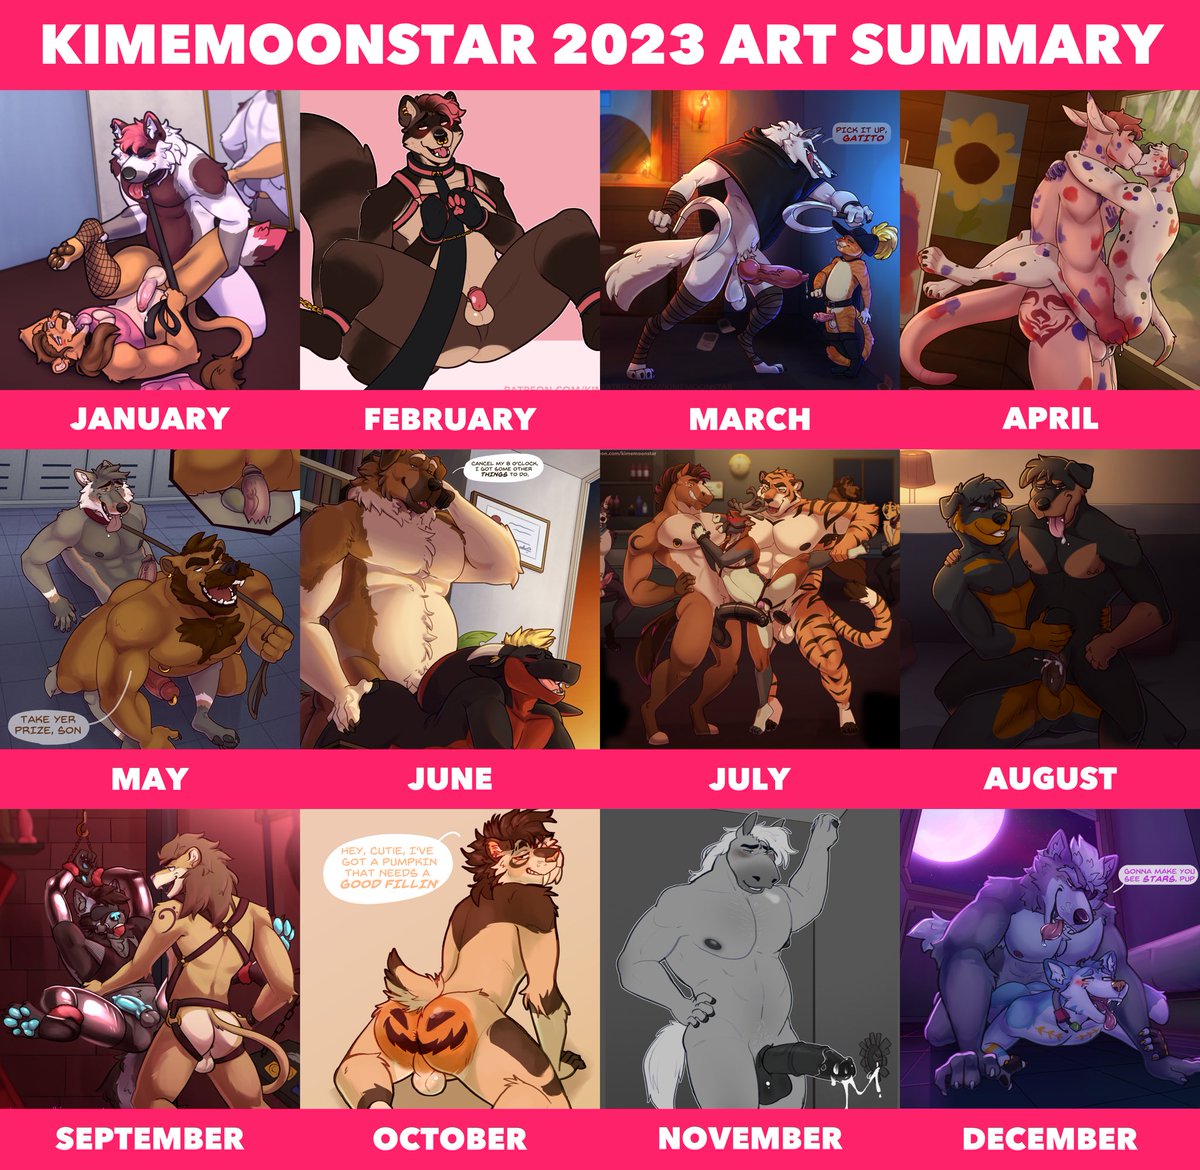 Even tho this year was hard because of school, I’m still proud of my art journey, I’m excited to continue growing and have each year be better and better!! Thank you all so much for a wonderful year 💖💖